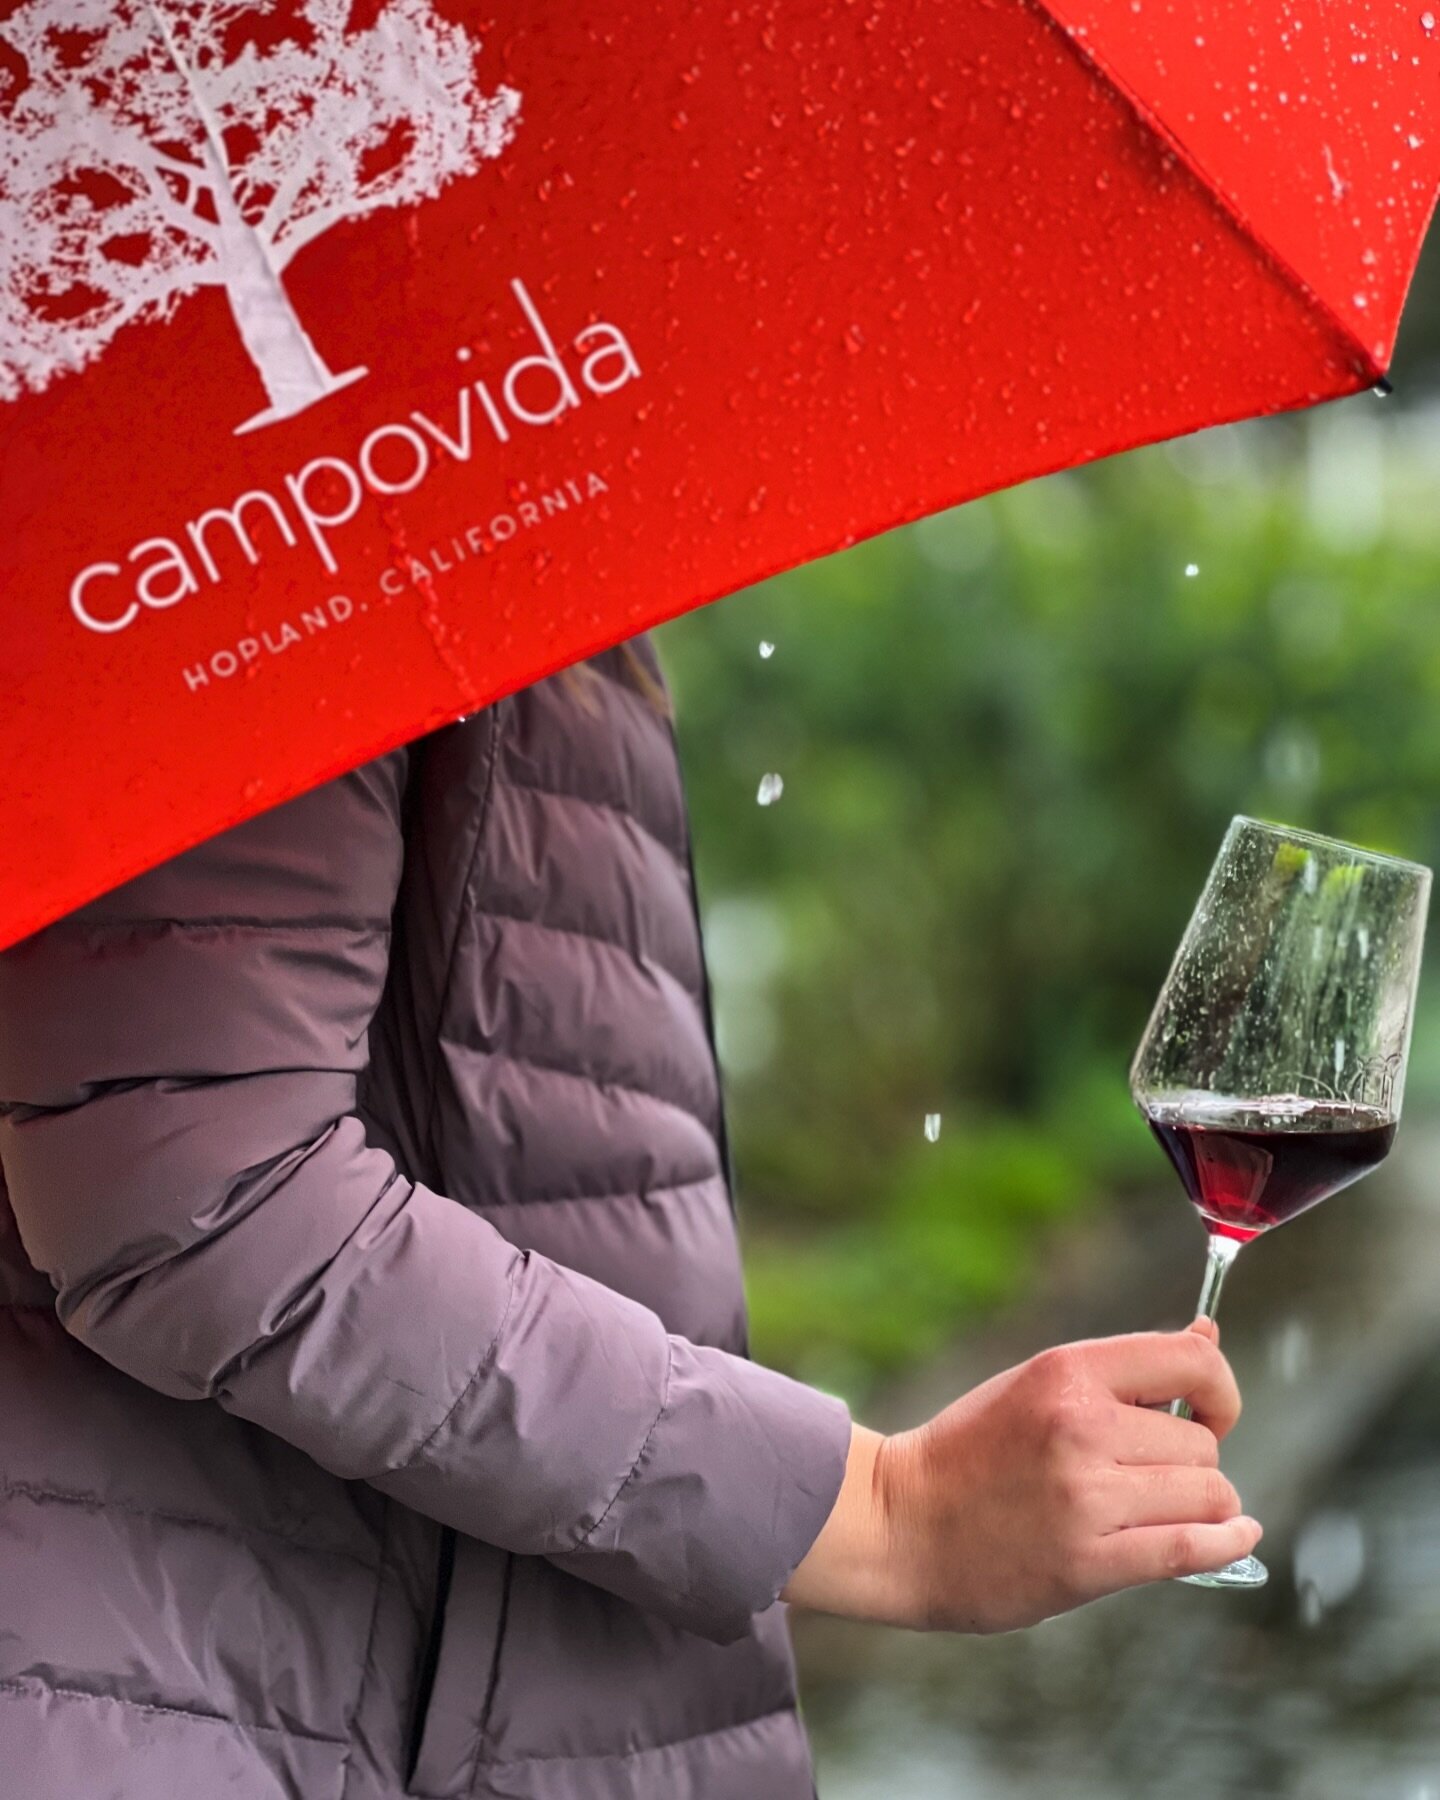 When Mother Nature rains, we pour.

Today is our seasonal party for our fellow stewards, members who invest in this land and our wines. We are all in this farming practice together.

Become a steward with us. Invest wisely. Care for yourself and the 